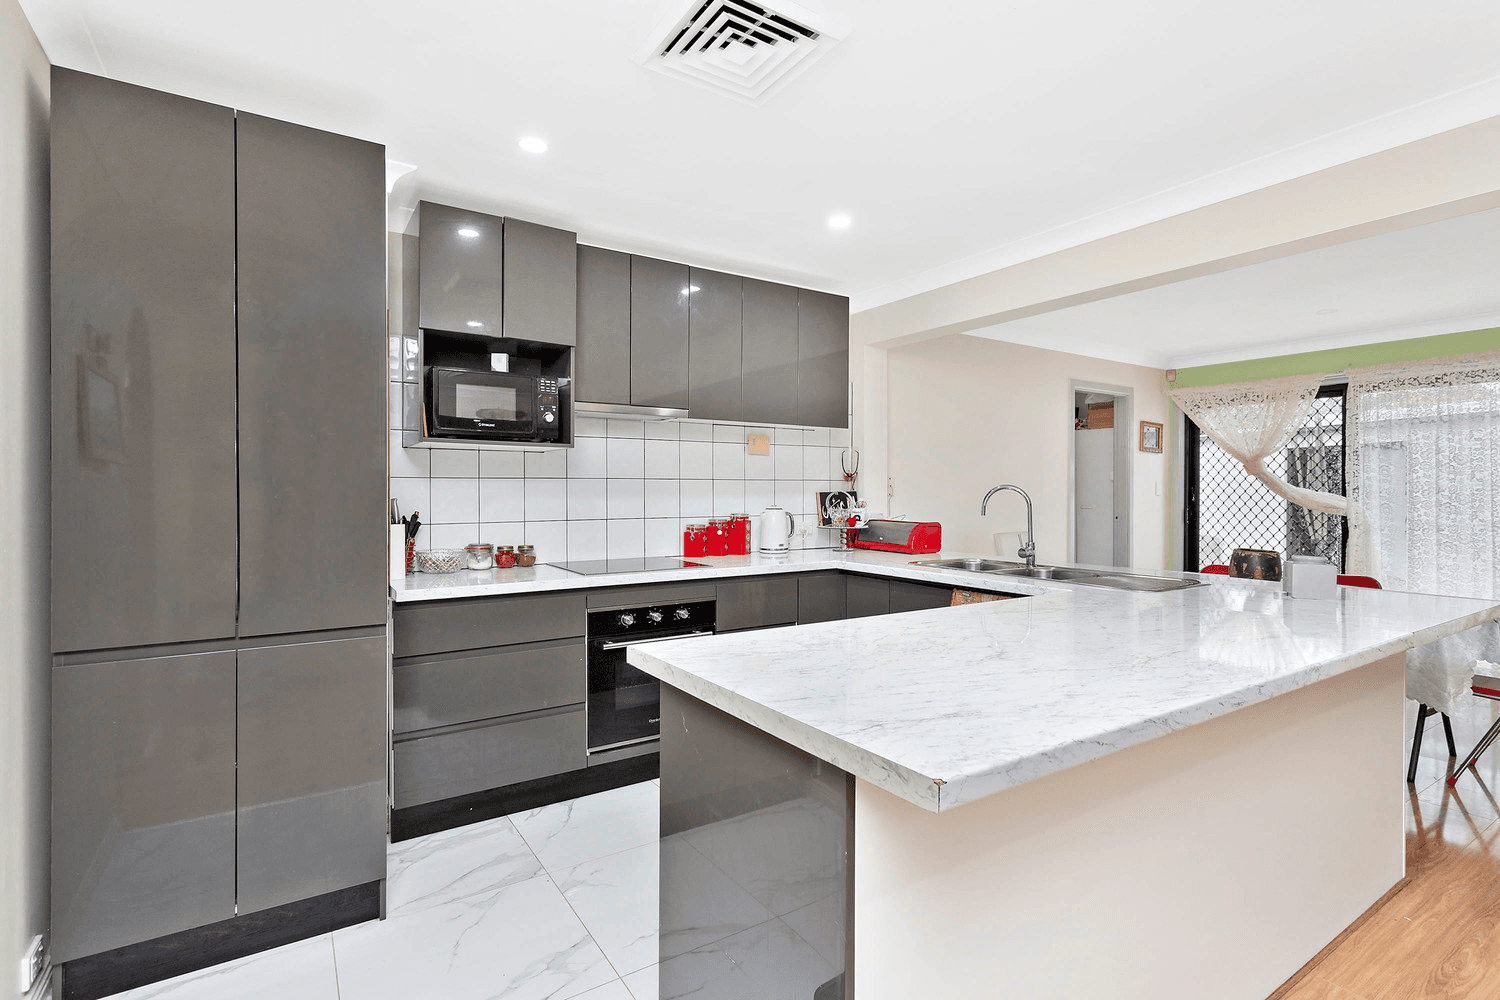 13 Somme Crescent, Milperra, NSW 2214